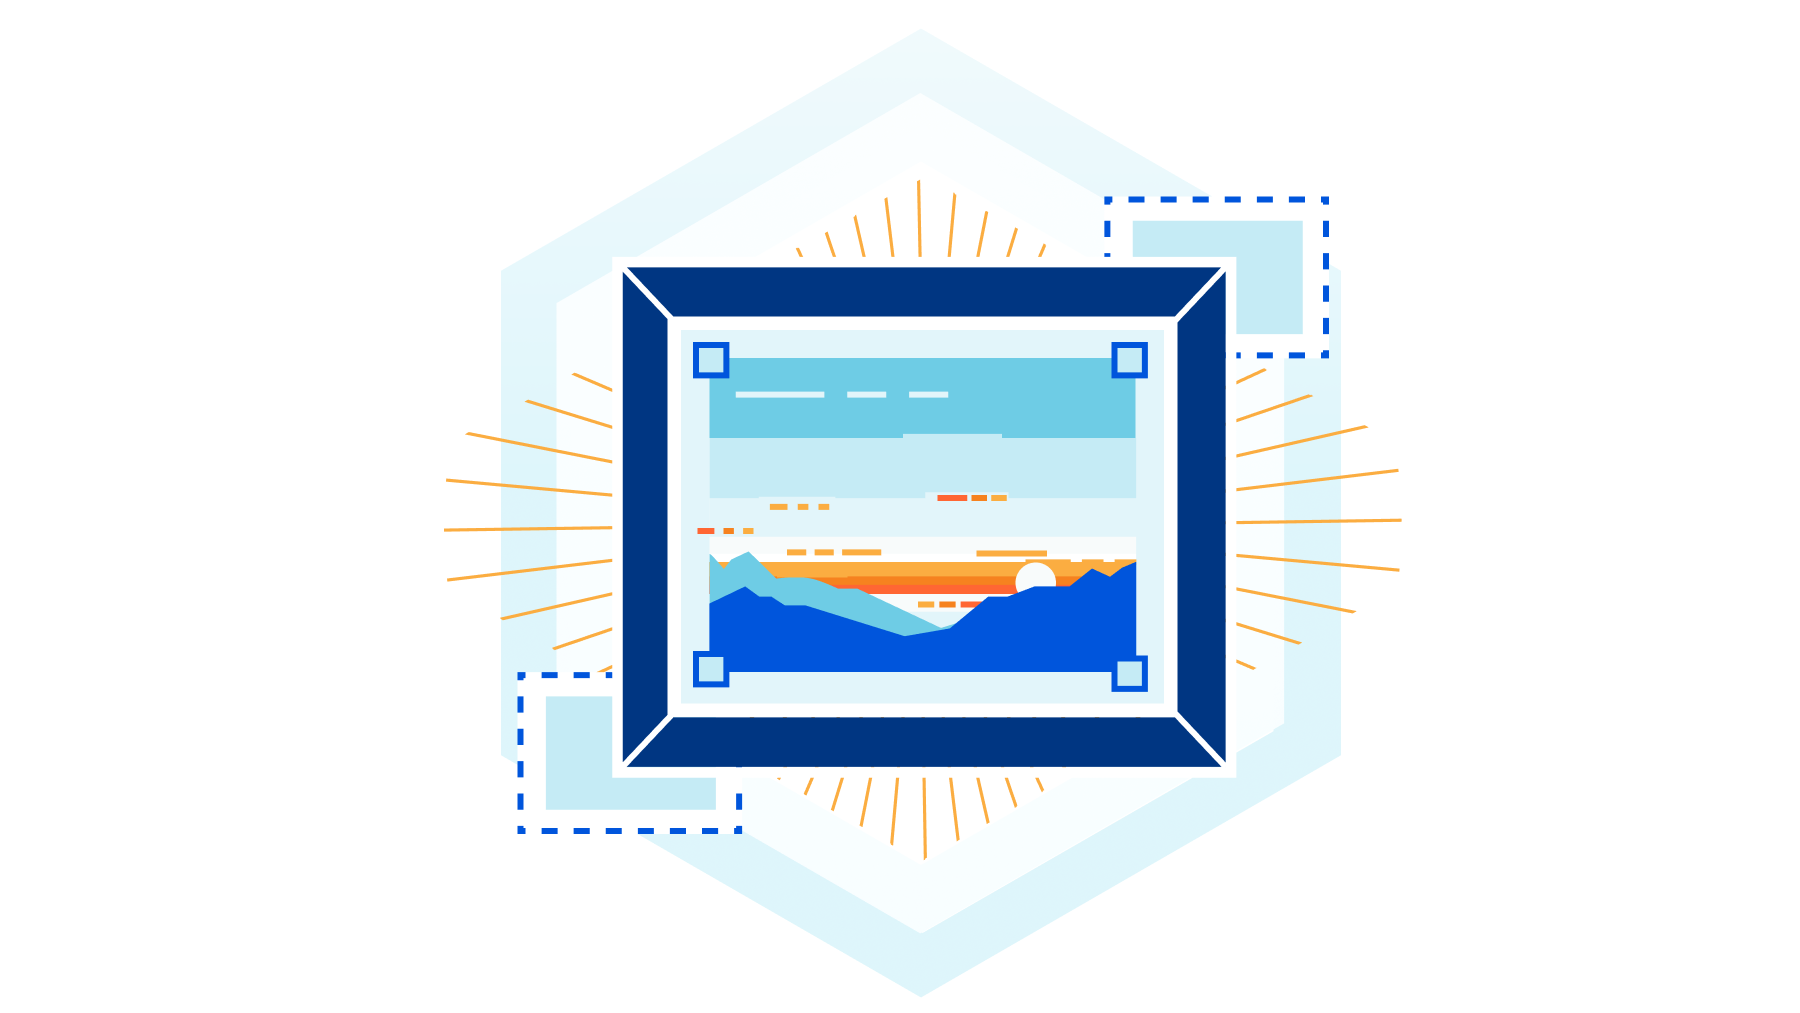 Cloudflare Images introduces AVIF, Blur and Bundle with Stream